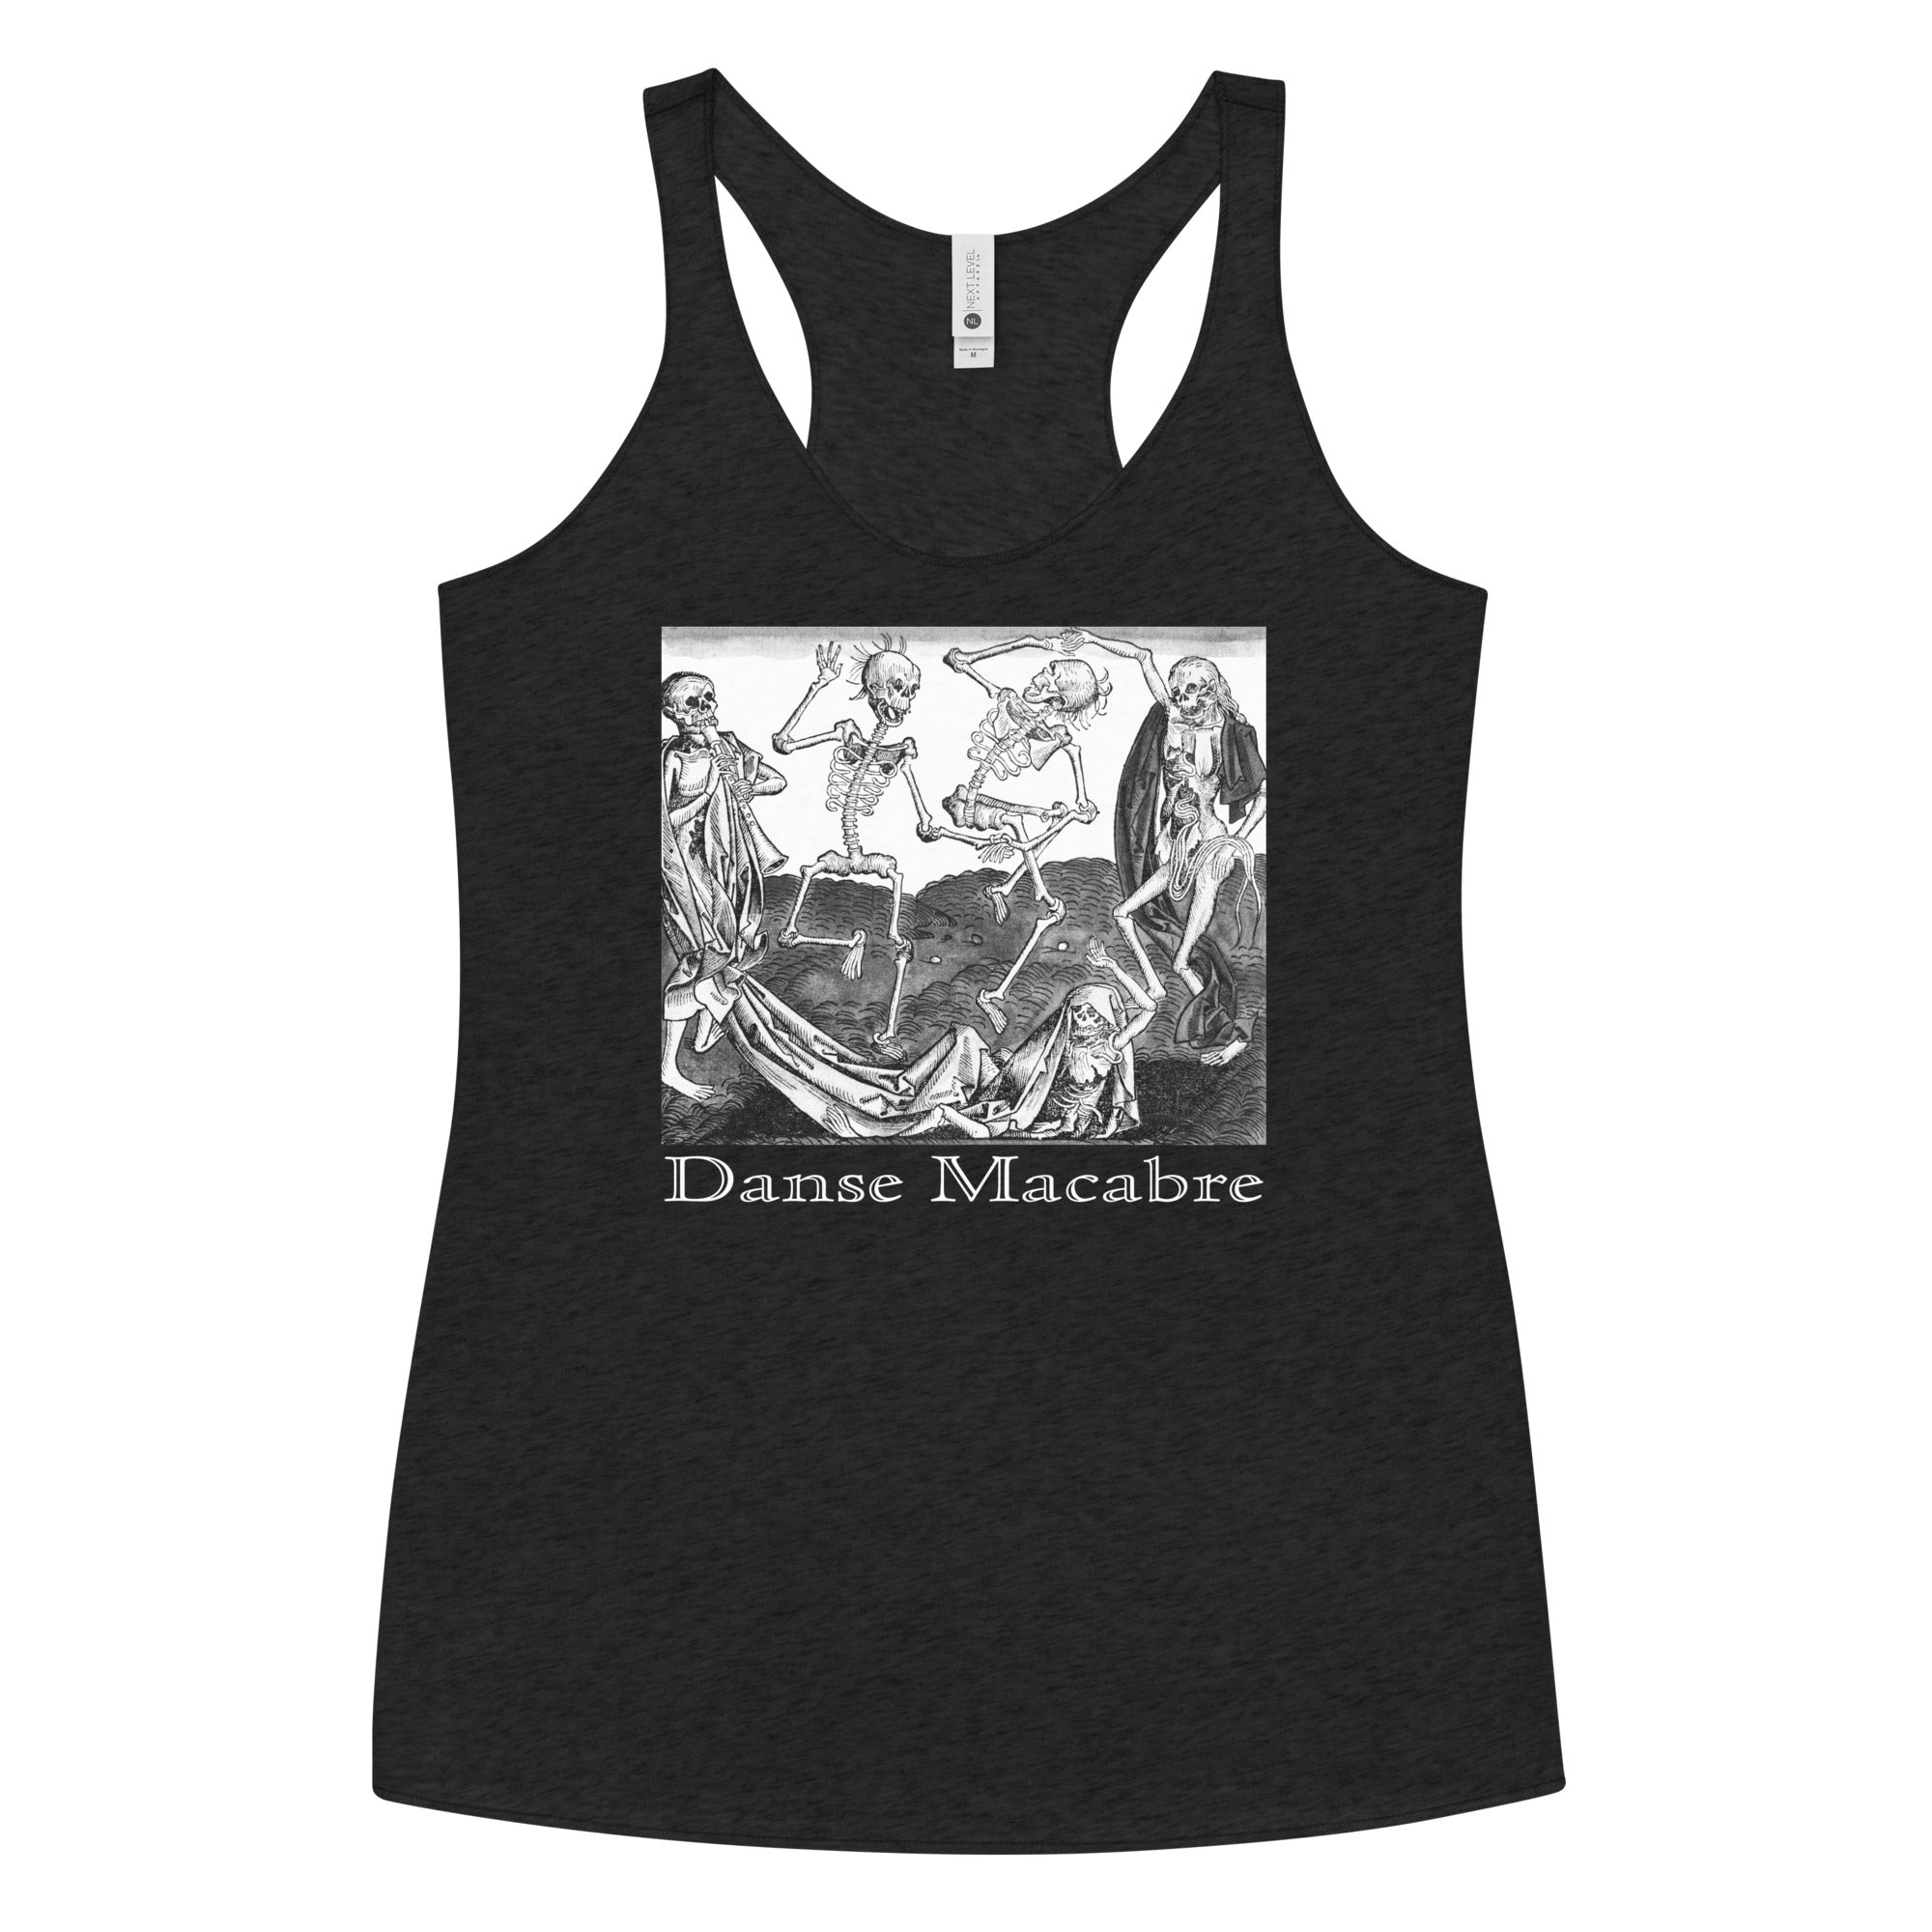 Dance Macabre Skeletons in the Medieval Dance of Death Women's Racerback Tank Top Shirt - Edge of Life Designs